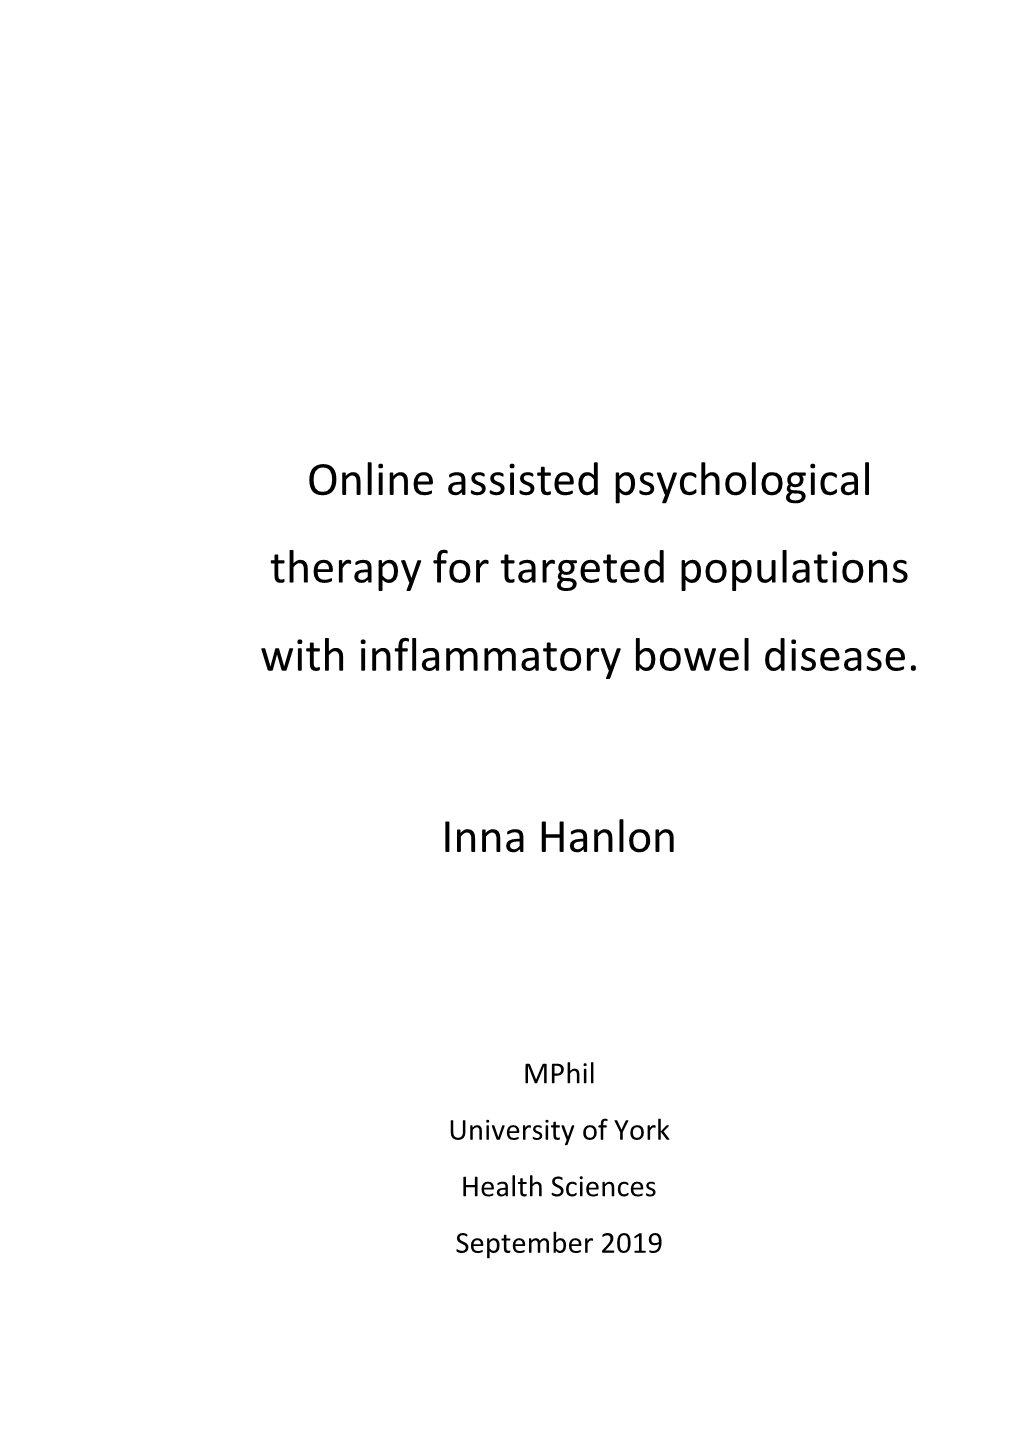 Online Assisted Psychological Therapy for Targeted Populations with Inflammatory Bowel Disease. Inna Hanlon